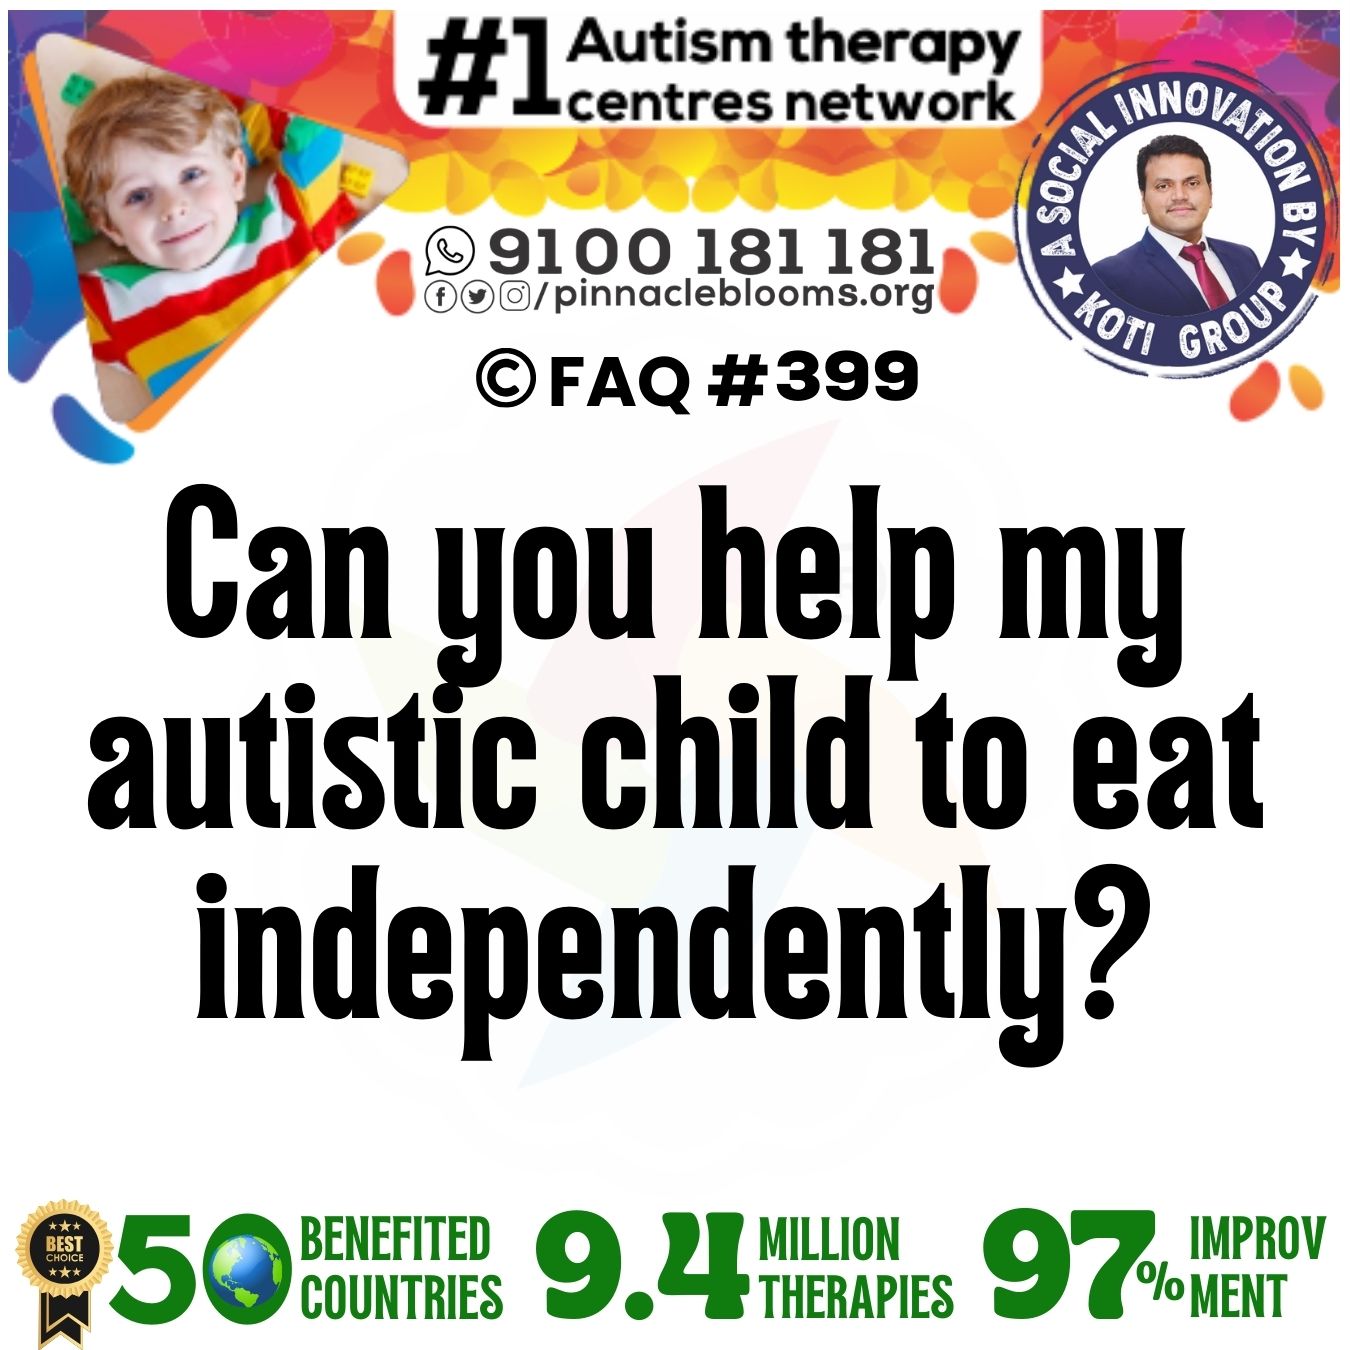 Can you help my autistic child to eat independently?